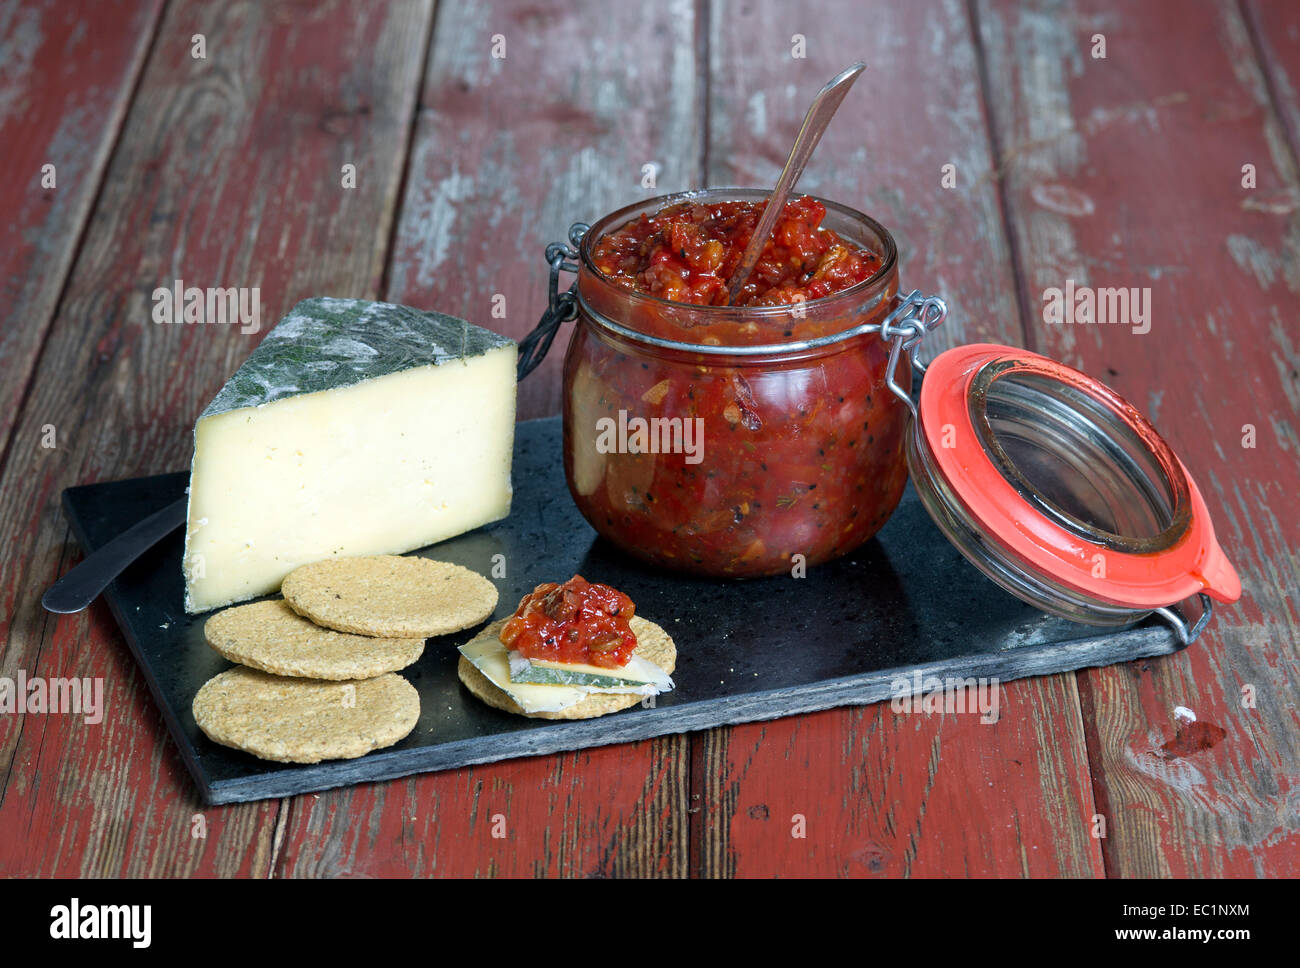 Cheese and biscuits with tomato chutney. Stock Photo